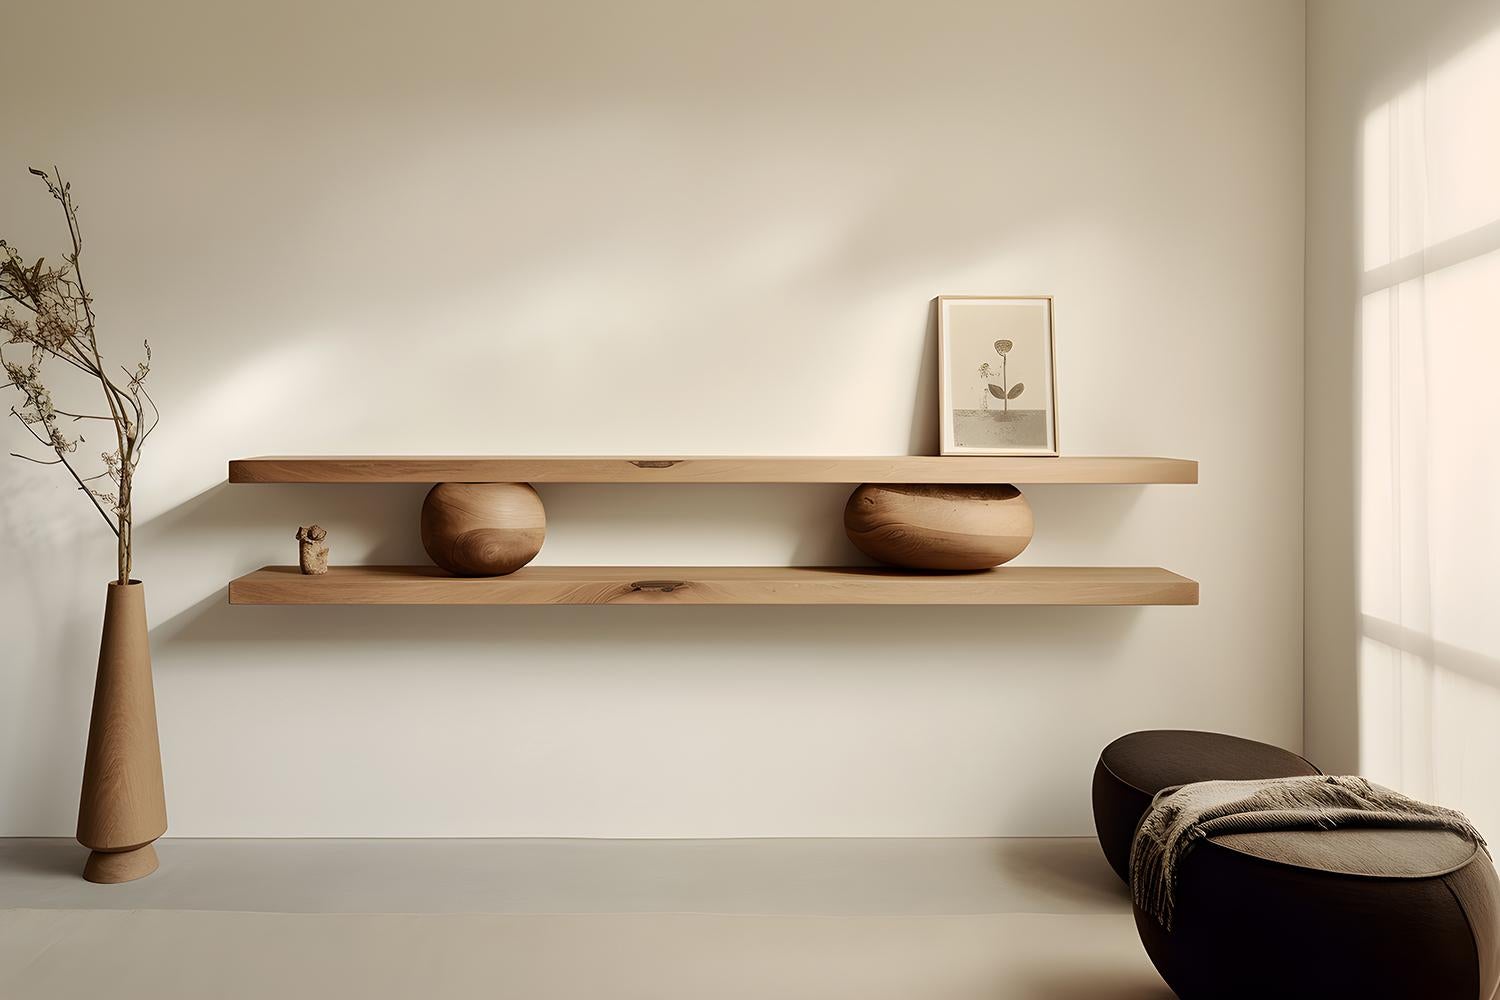 Set of Two Large Floating Shelves with Two Sculptural Wooden Pebble Accents in the Middle, Sereno by Joel Escalona

—

What happens when the practical becomes art?
What happens when ornamentation gains significance?

Those were the questions Joel